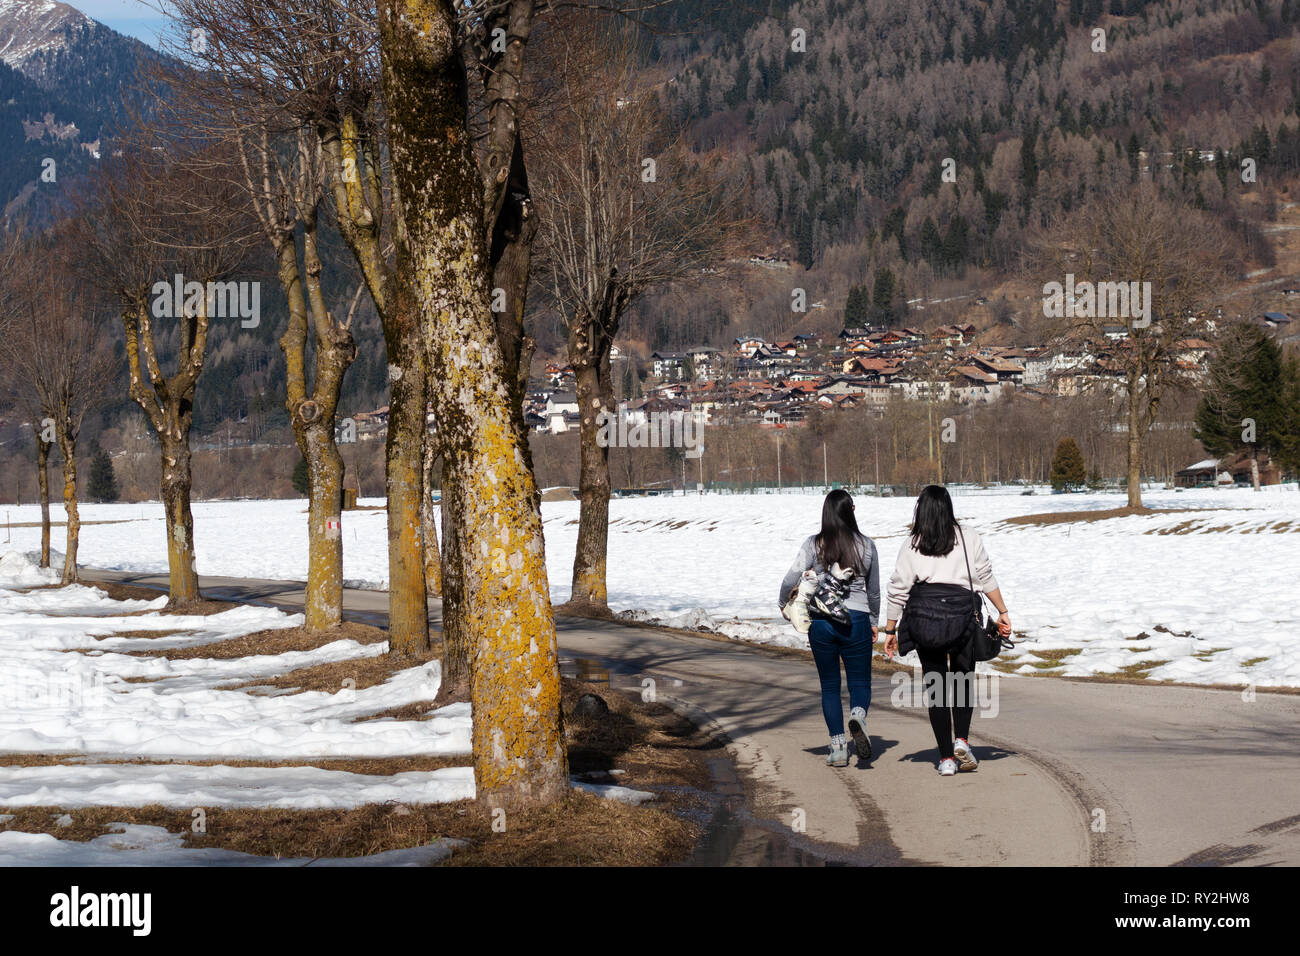 Two women walking to the village of Pinzolo in the Brenta Dolomites, northern Italy Europe Stock Photo